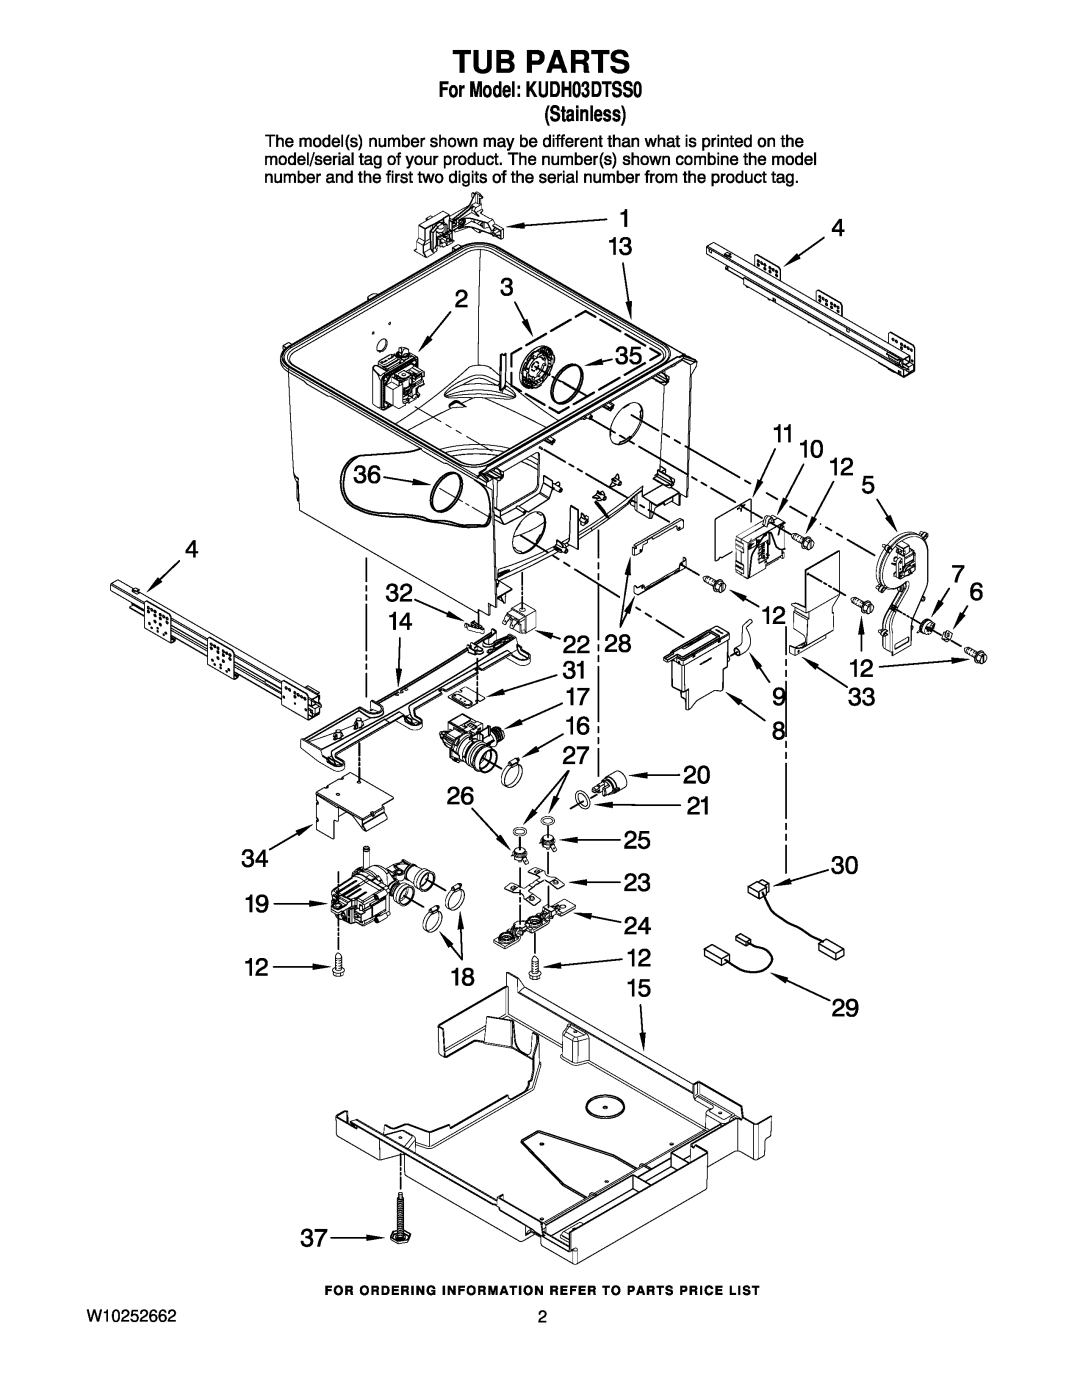 KitchenAid manual Tub Parts, W10252662, For Model KUDH03DTSS0 Stainless 